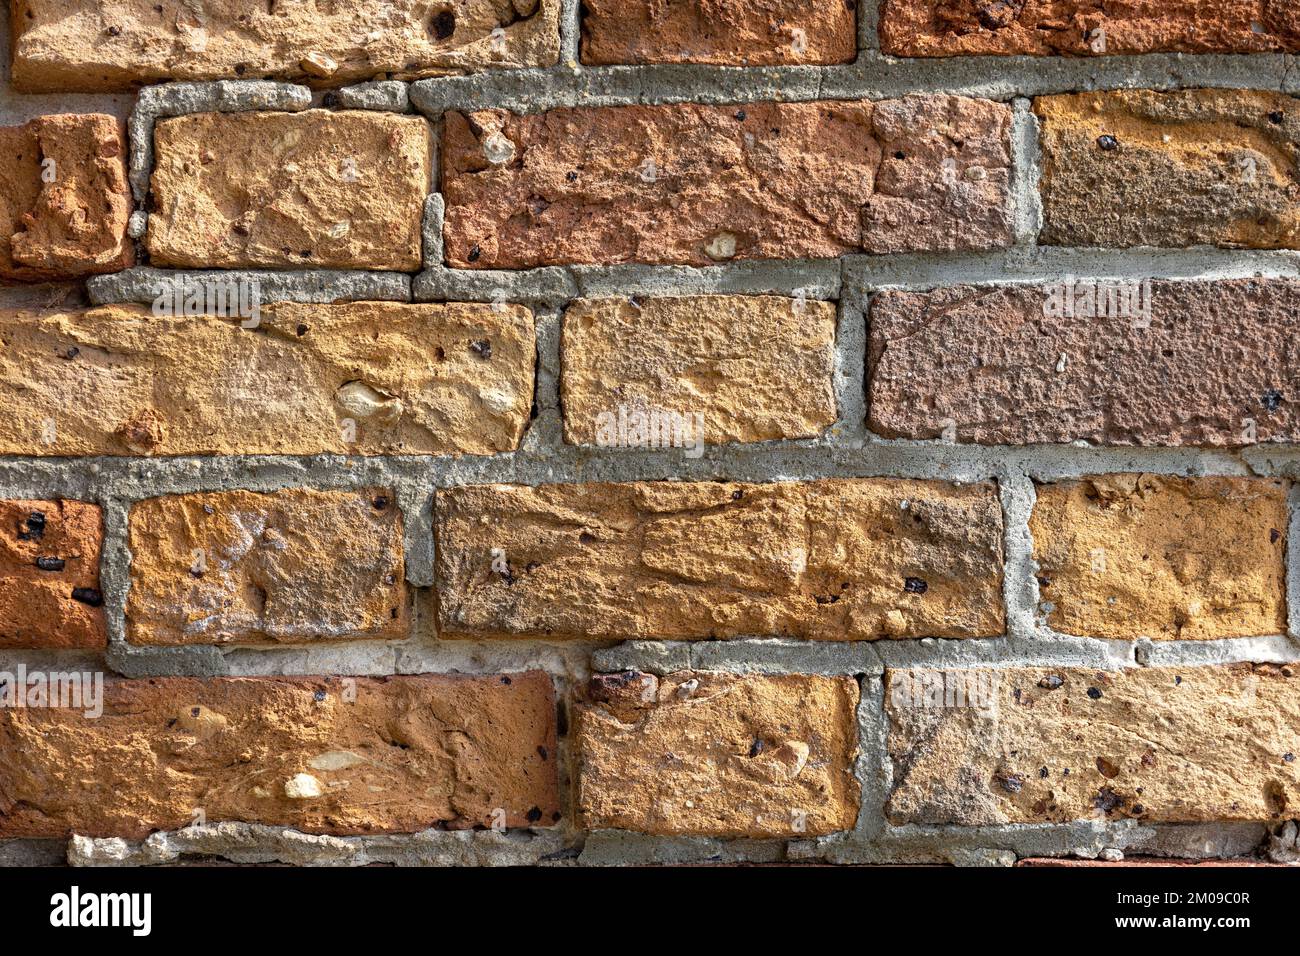 Old Red Bricks Close Up Creates A Pattern For A Textured Background Element. Antique House Bricks And Mortar Stock Photo